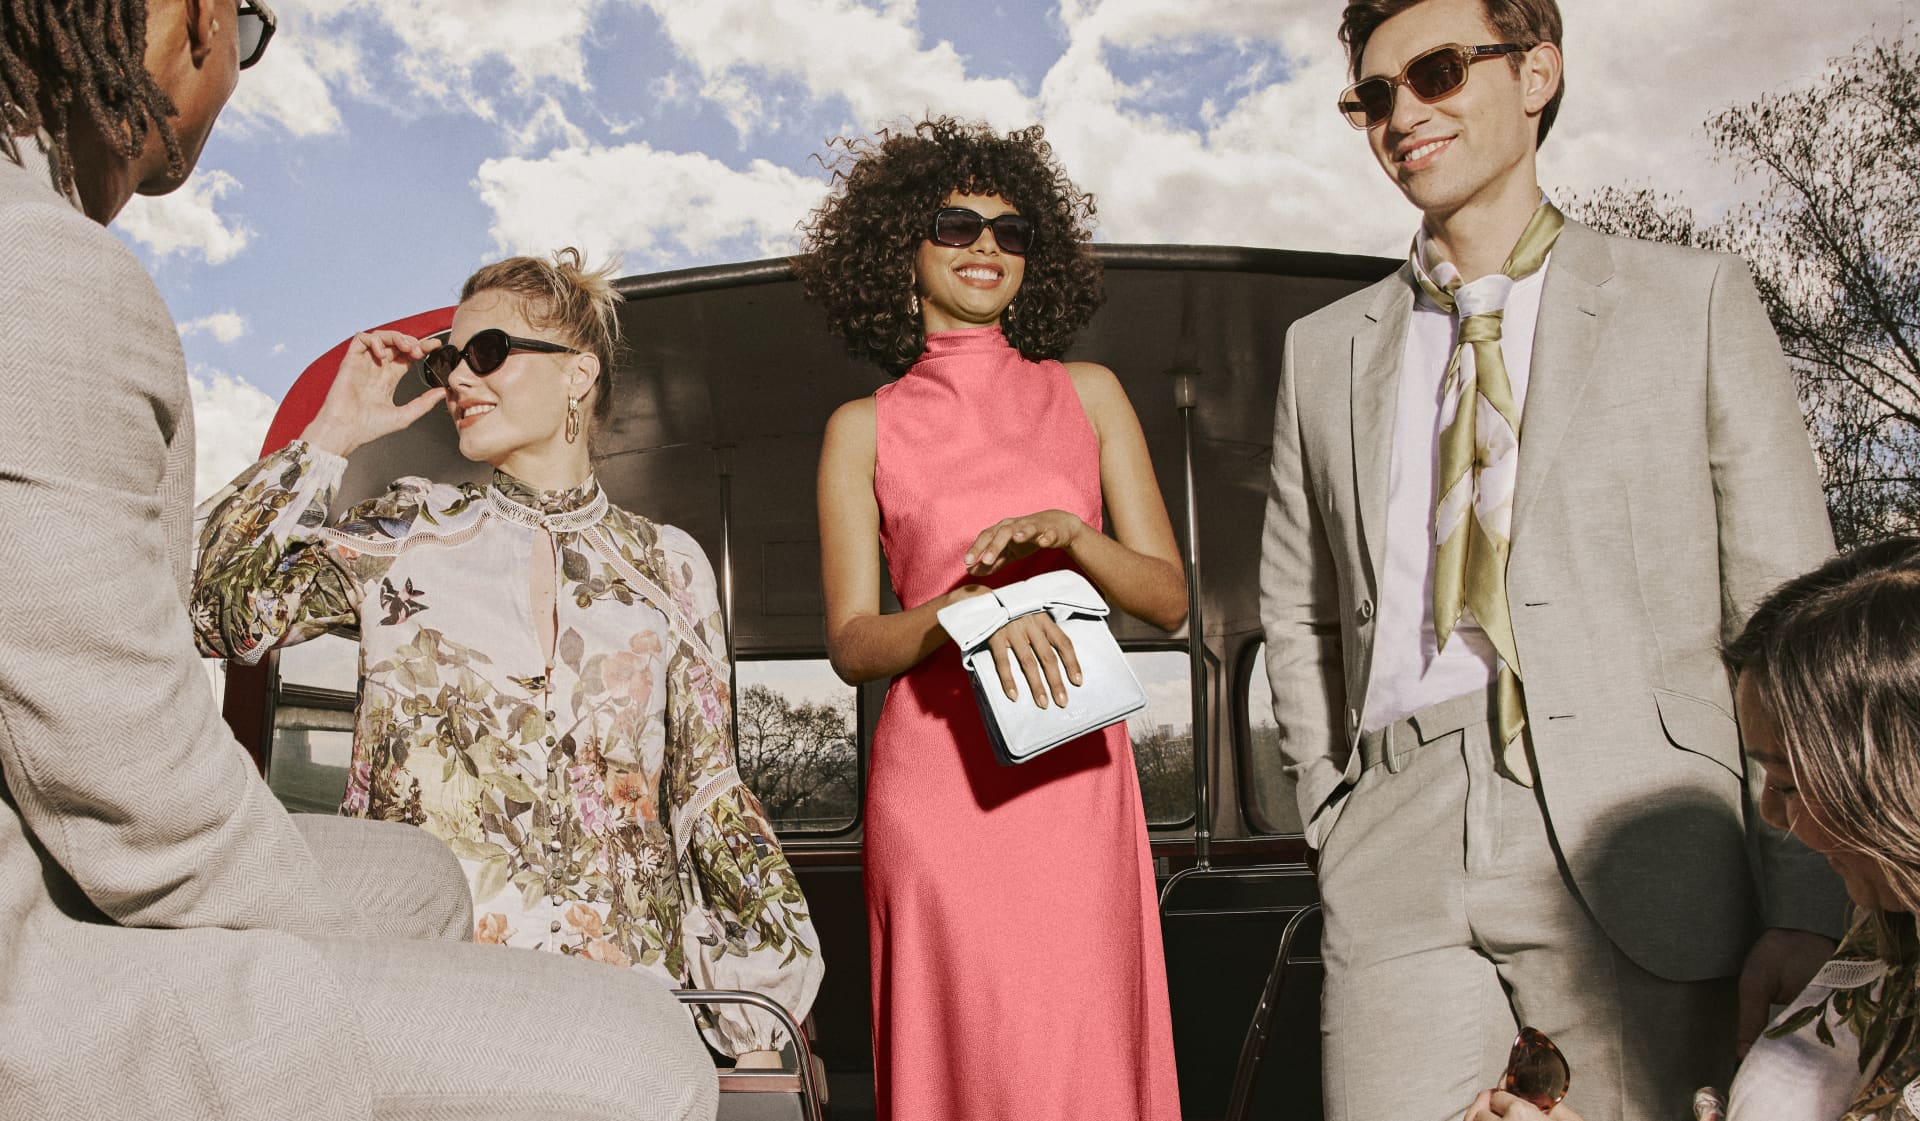 Woman wearing sunglasses in a pink dress carrying a white clutch bag, woman on the left wearing sunglasses and floral print dress and man on the right wearing sunglasses in a grey suit